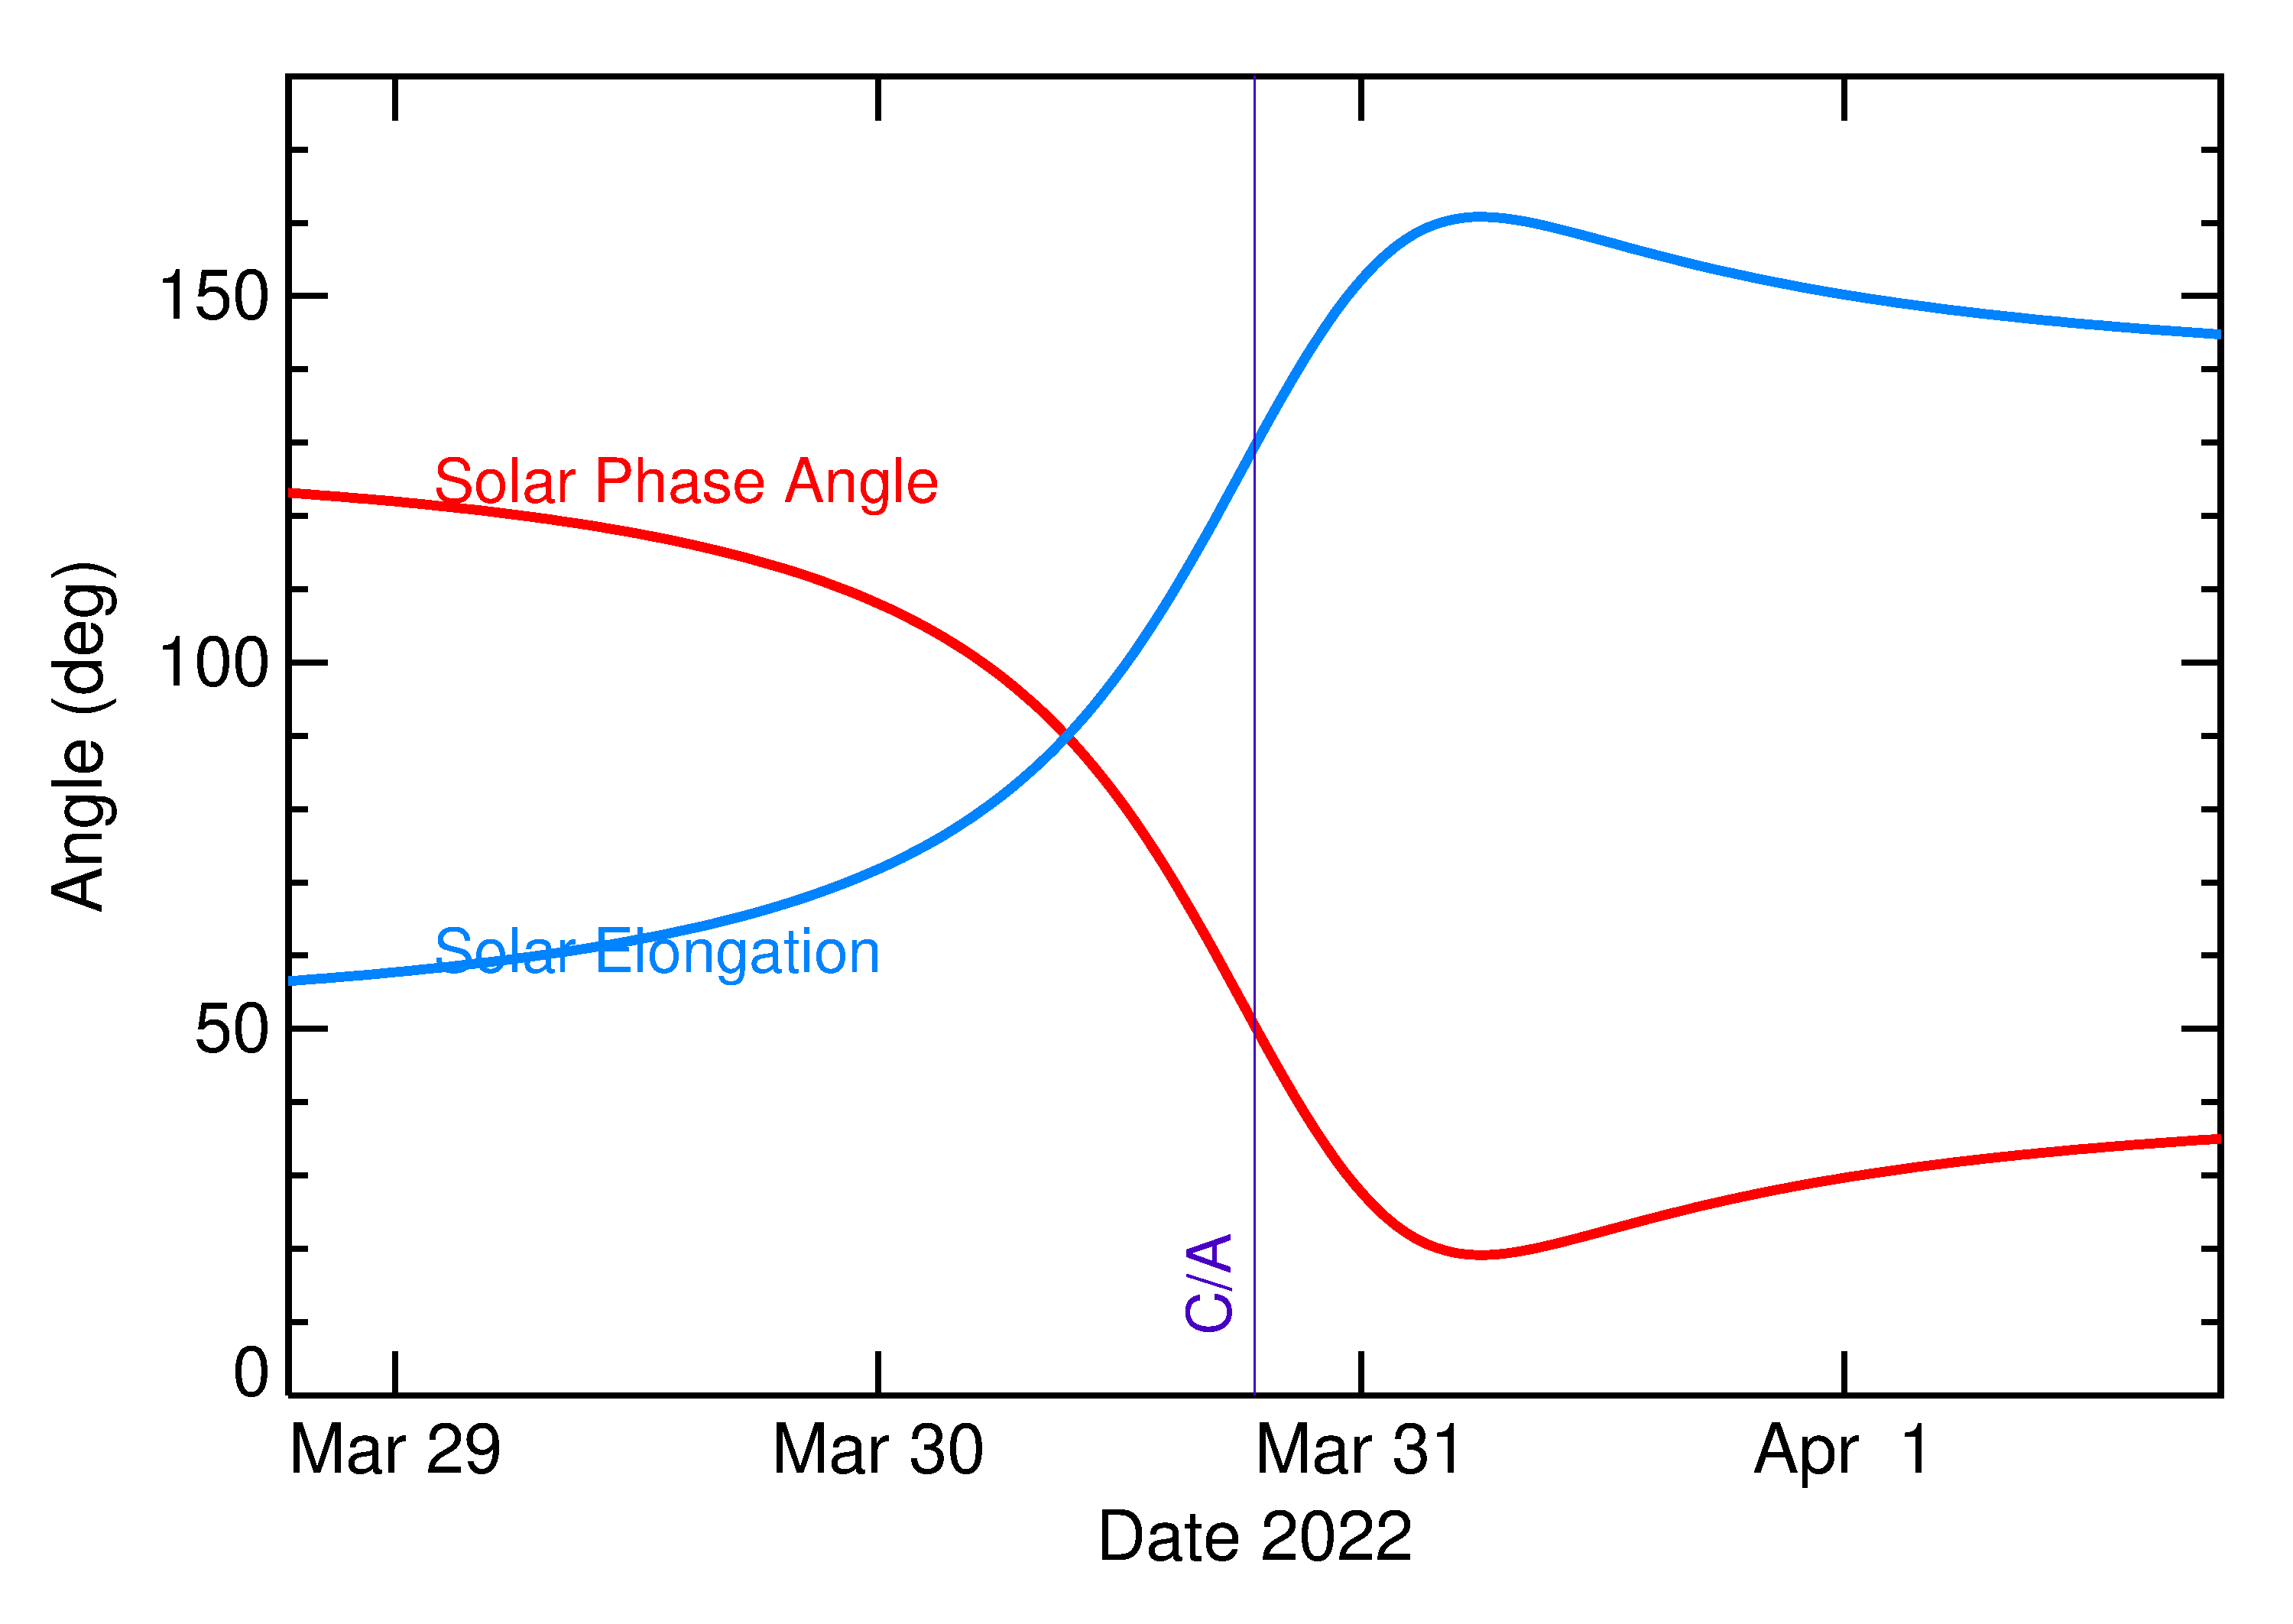 Solar Elongation and Solar Phase Angle of 2022 GB2 in the days around closest approach